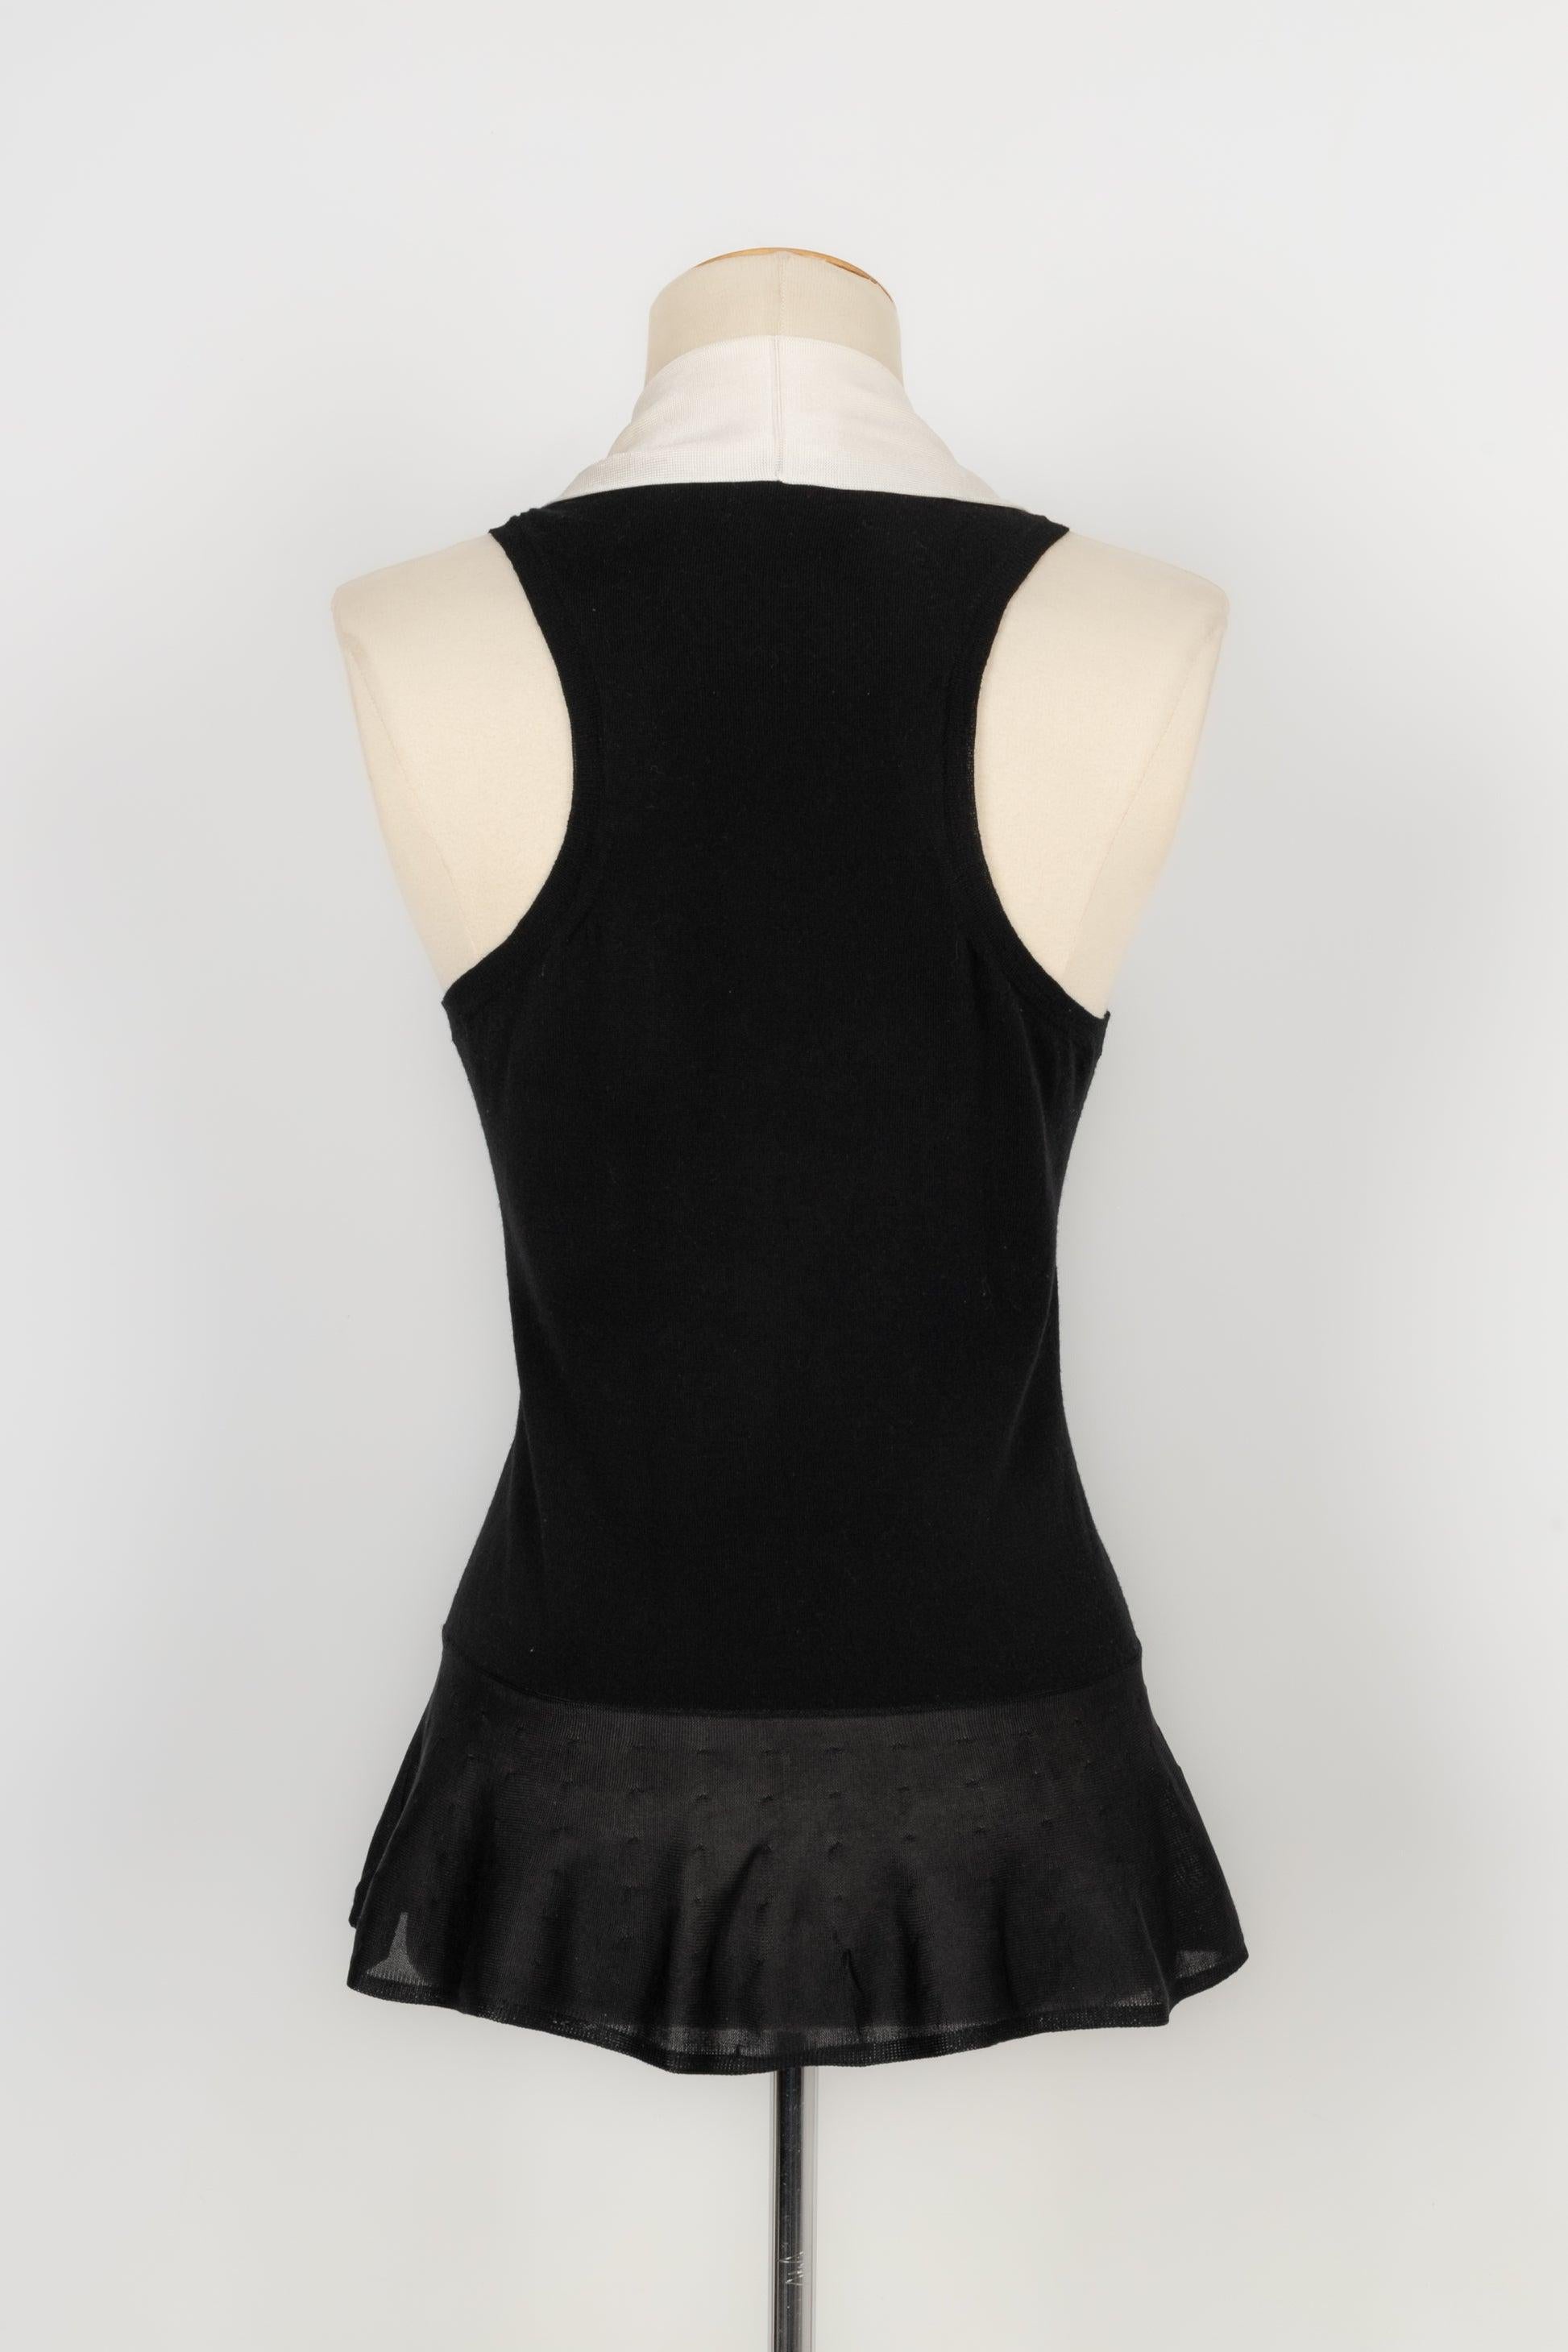 Christian Dior Black Mesh Sleeveless Top In Excellent Condition For Sale In SAINT-OUEN-SUR-SEINE, FR